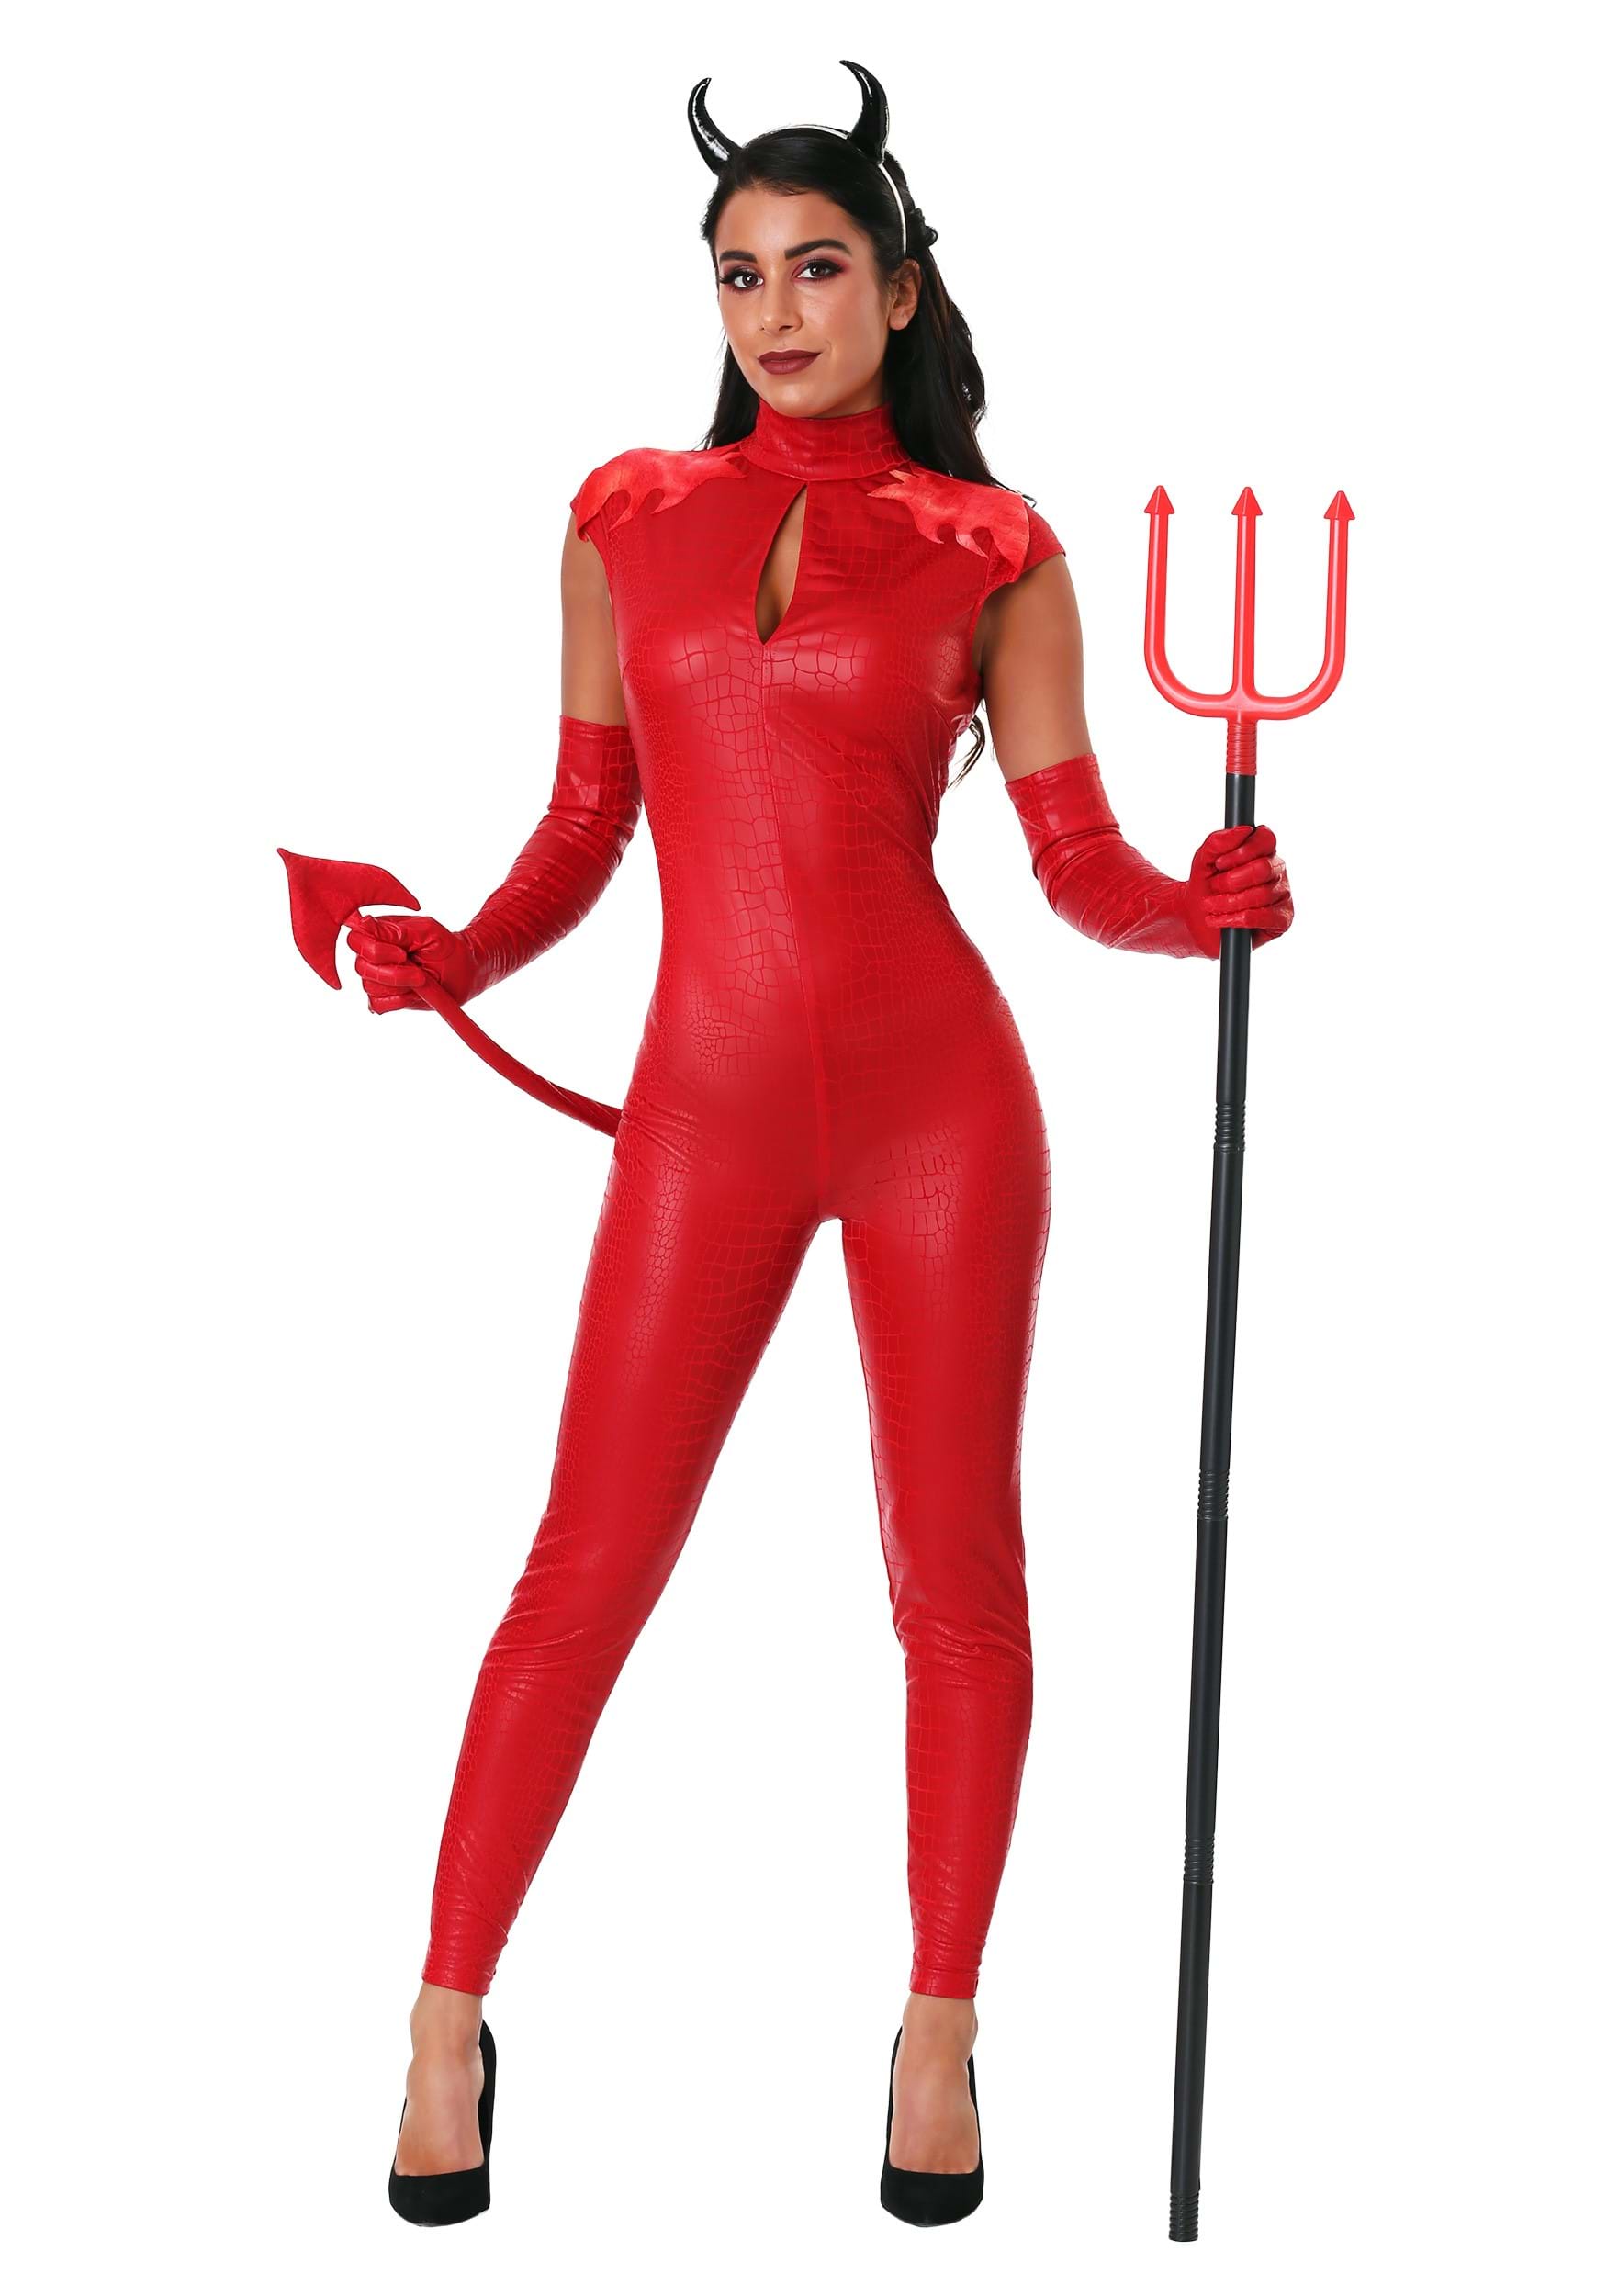 Red Devil Horns Headband And Pitch Fork Satan Trident Costume Accessories